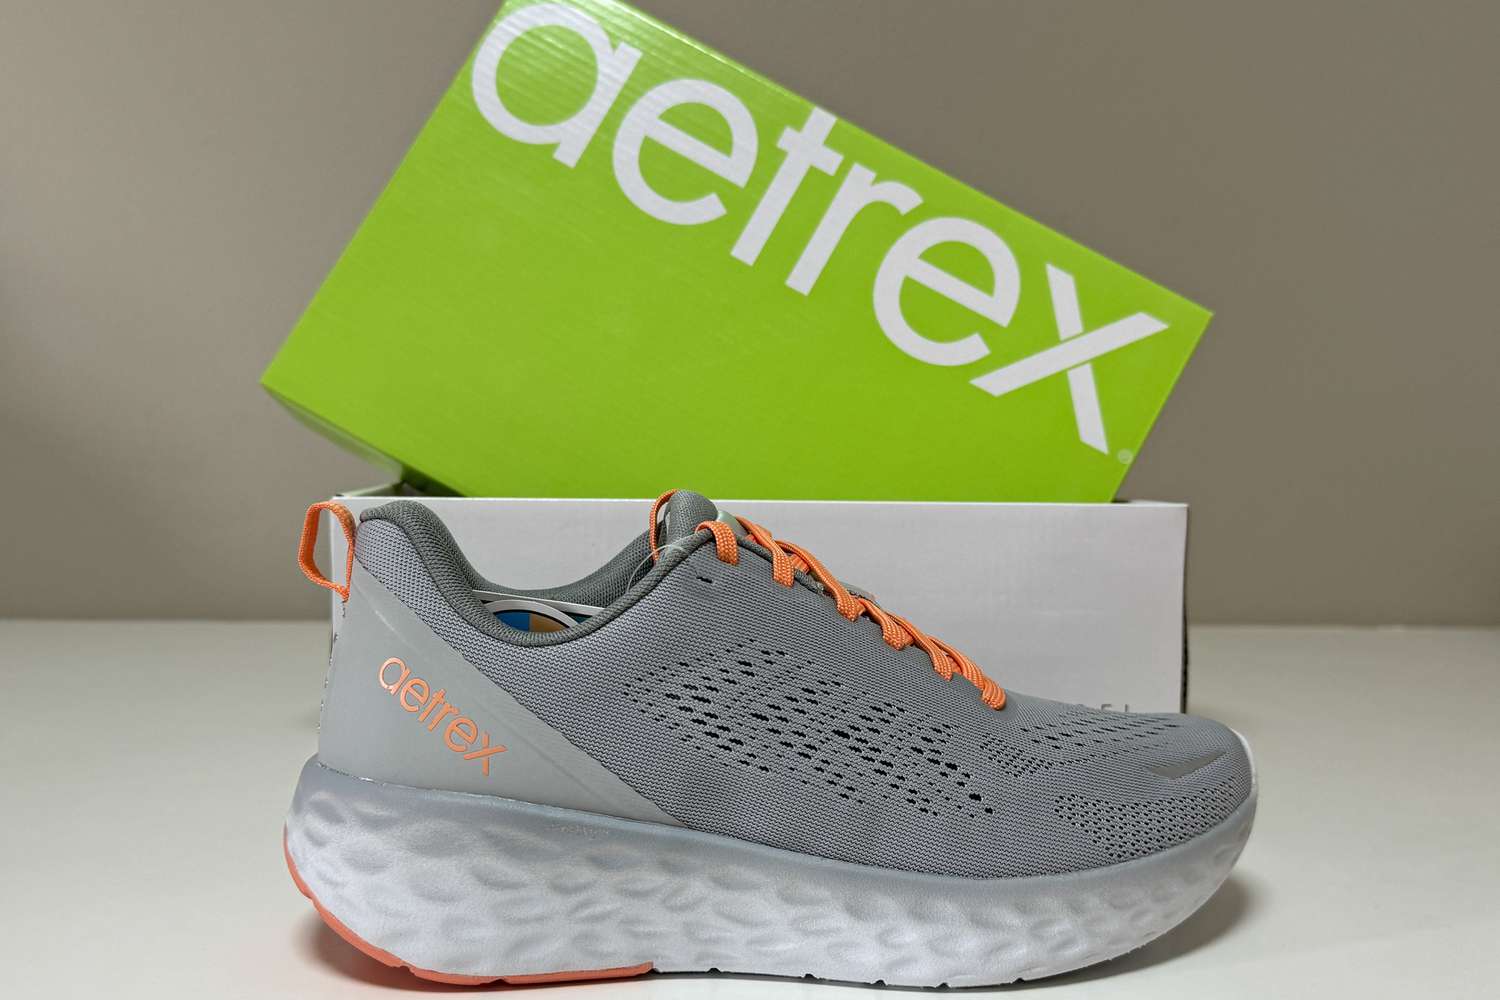 The Aetrex Danika Arch Support Sneaker in front of the brand's shoe box